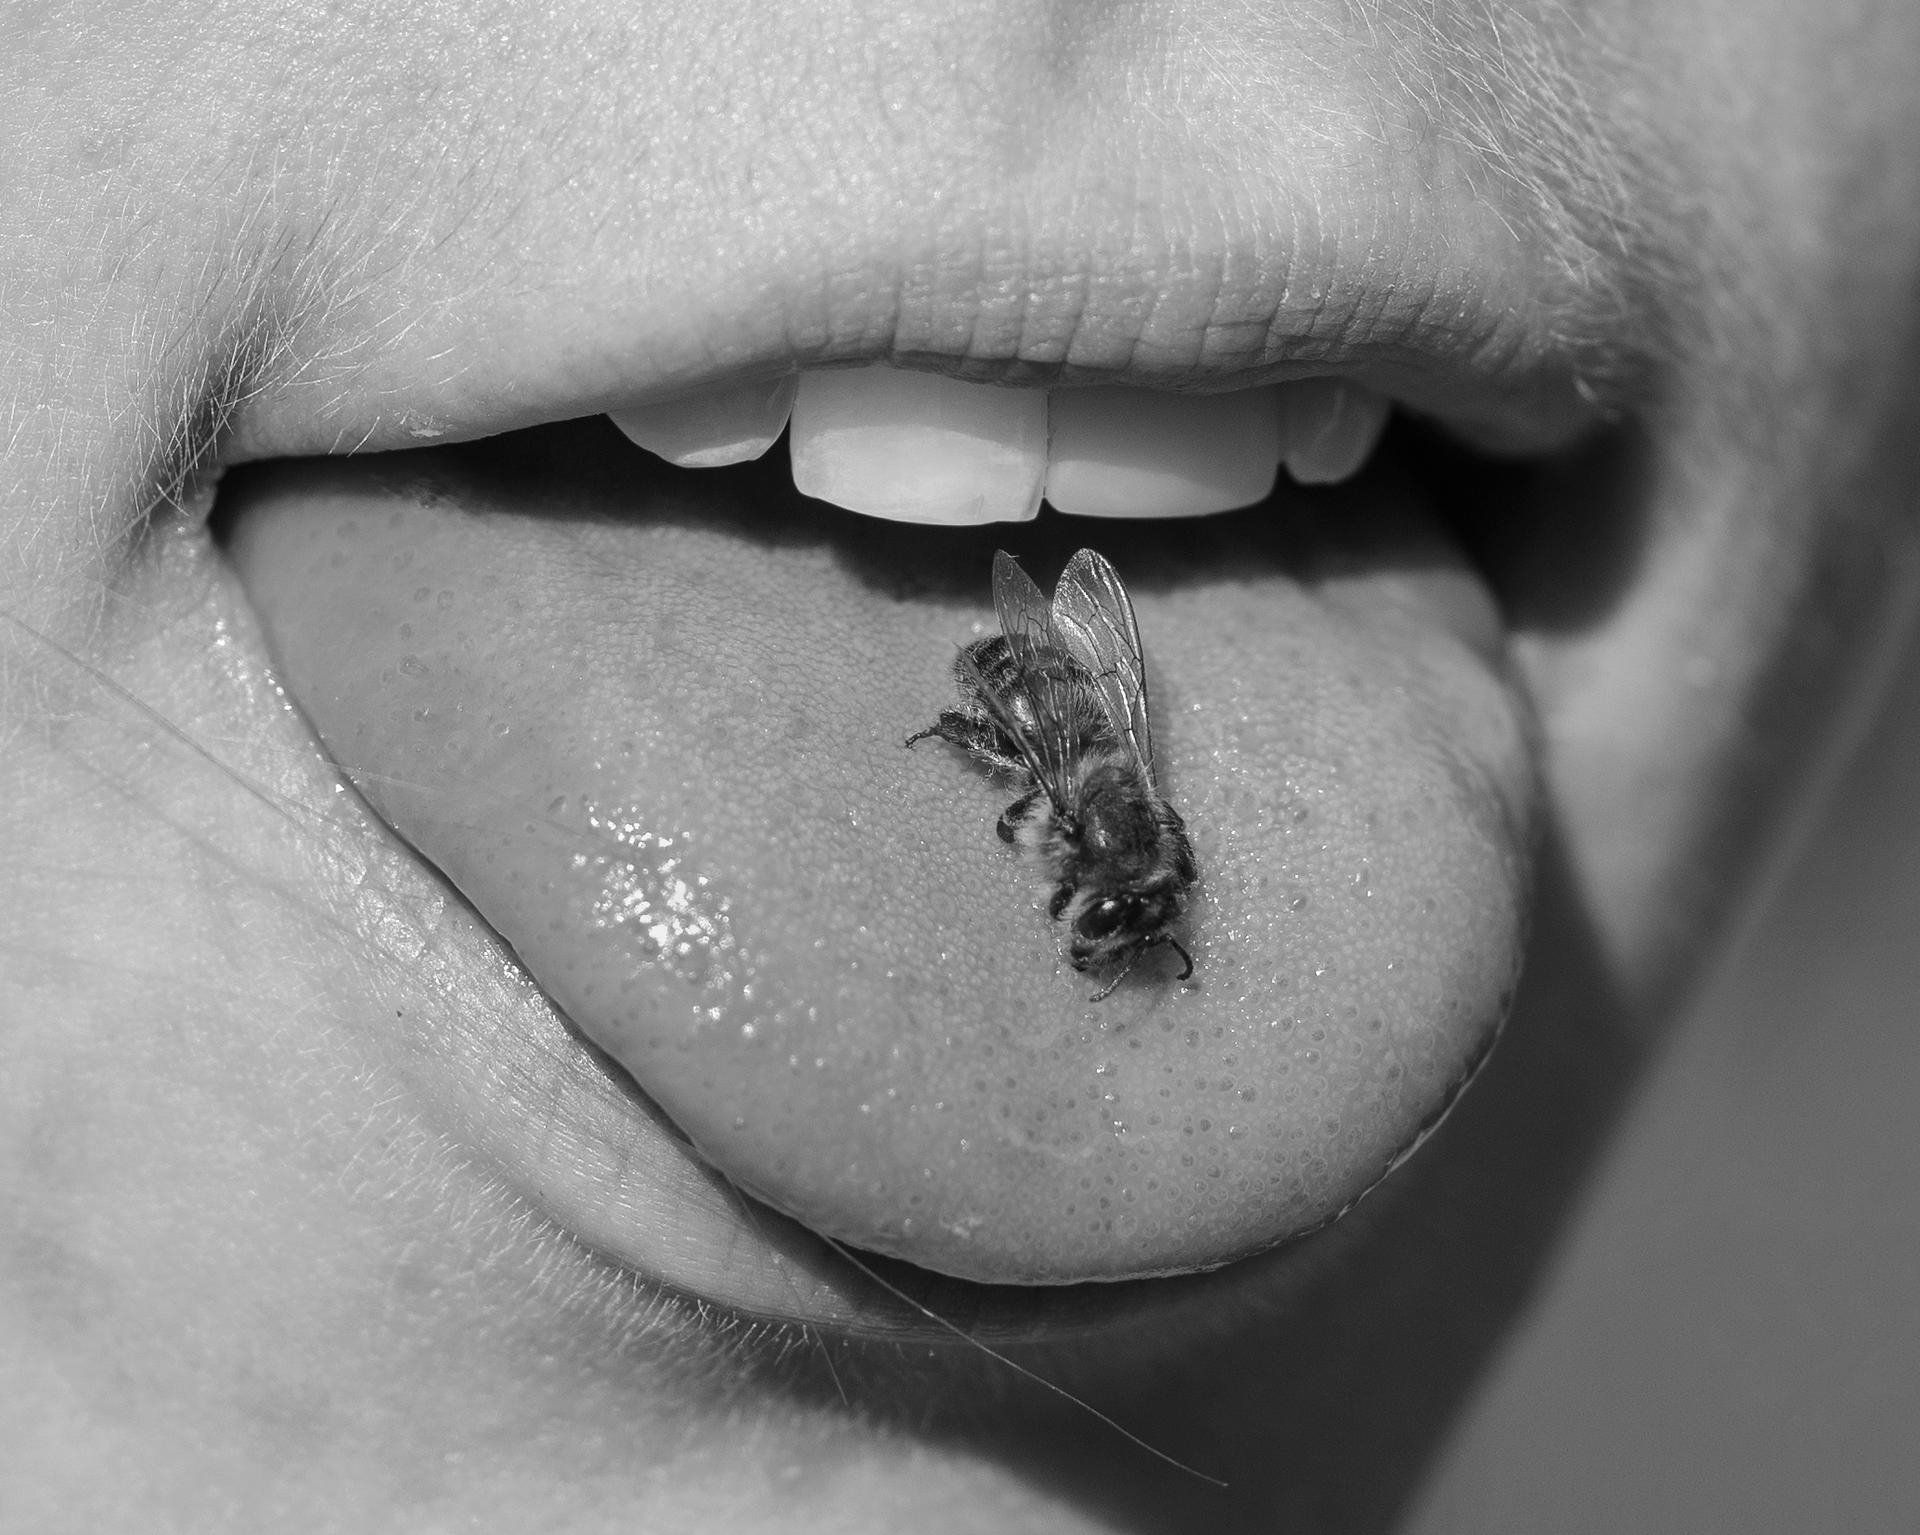 Untitled (Bee in Mouth), 2020